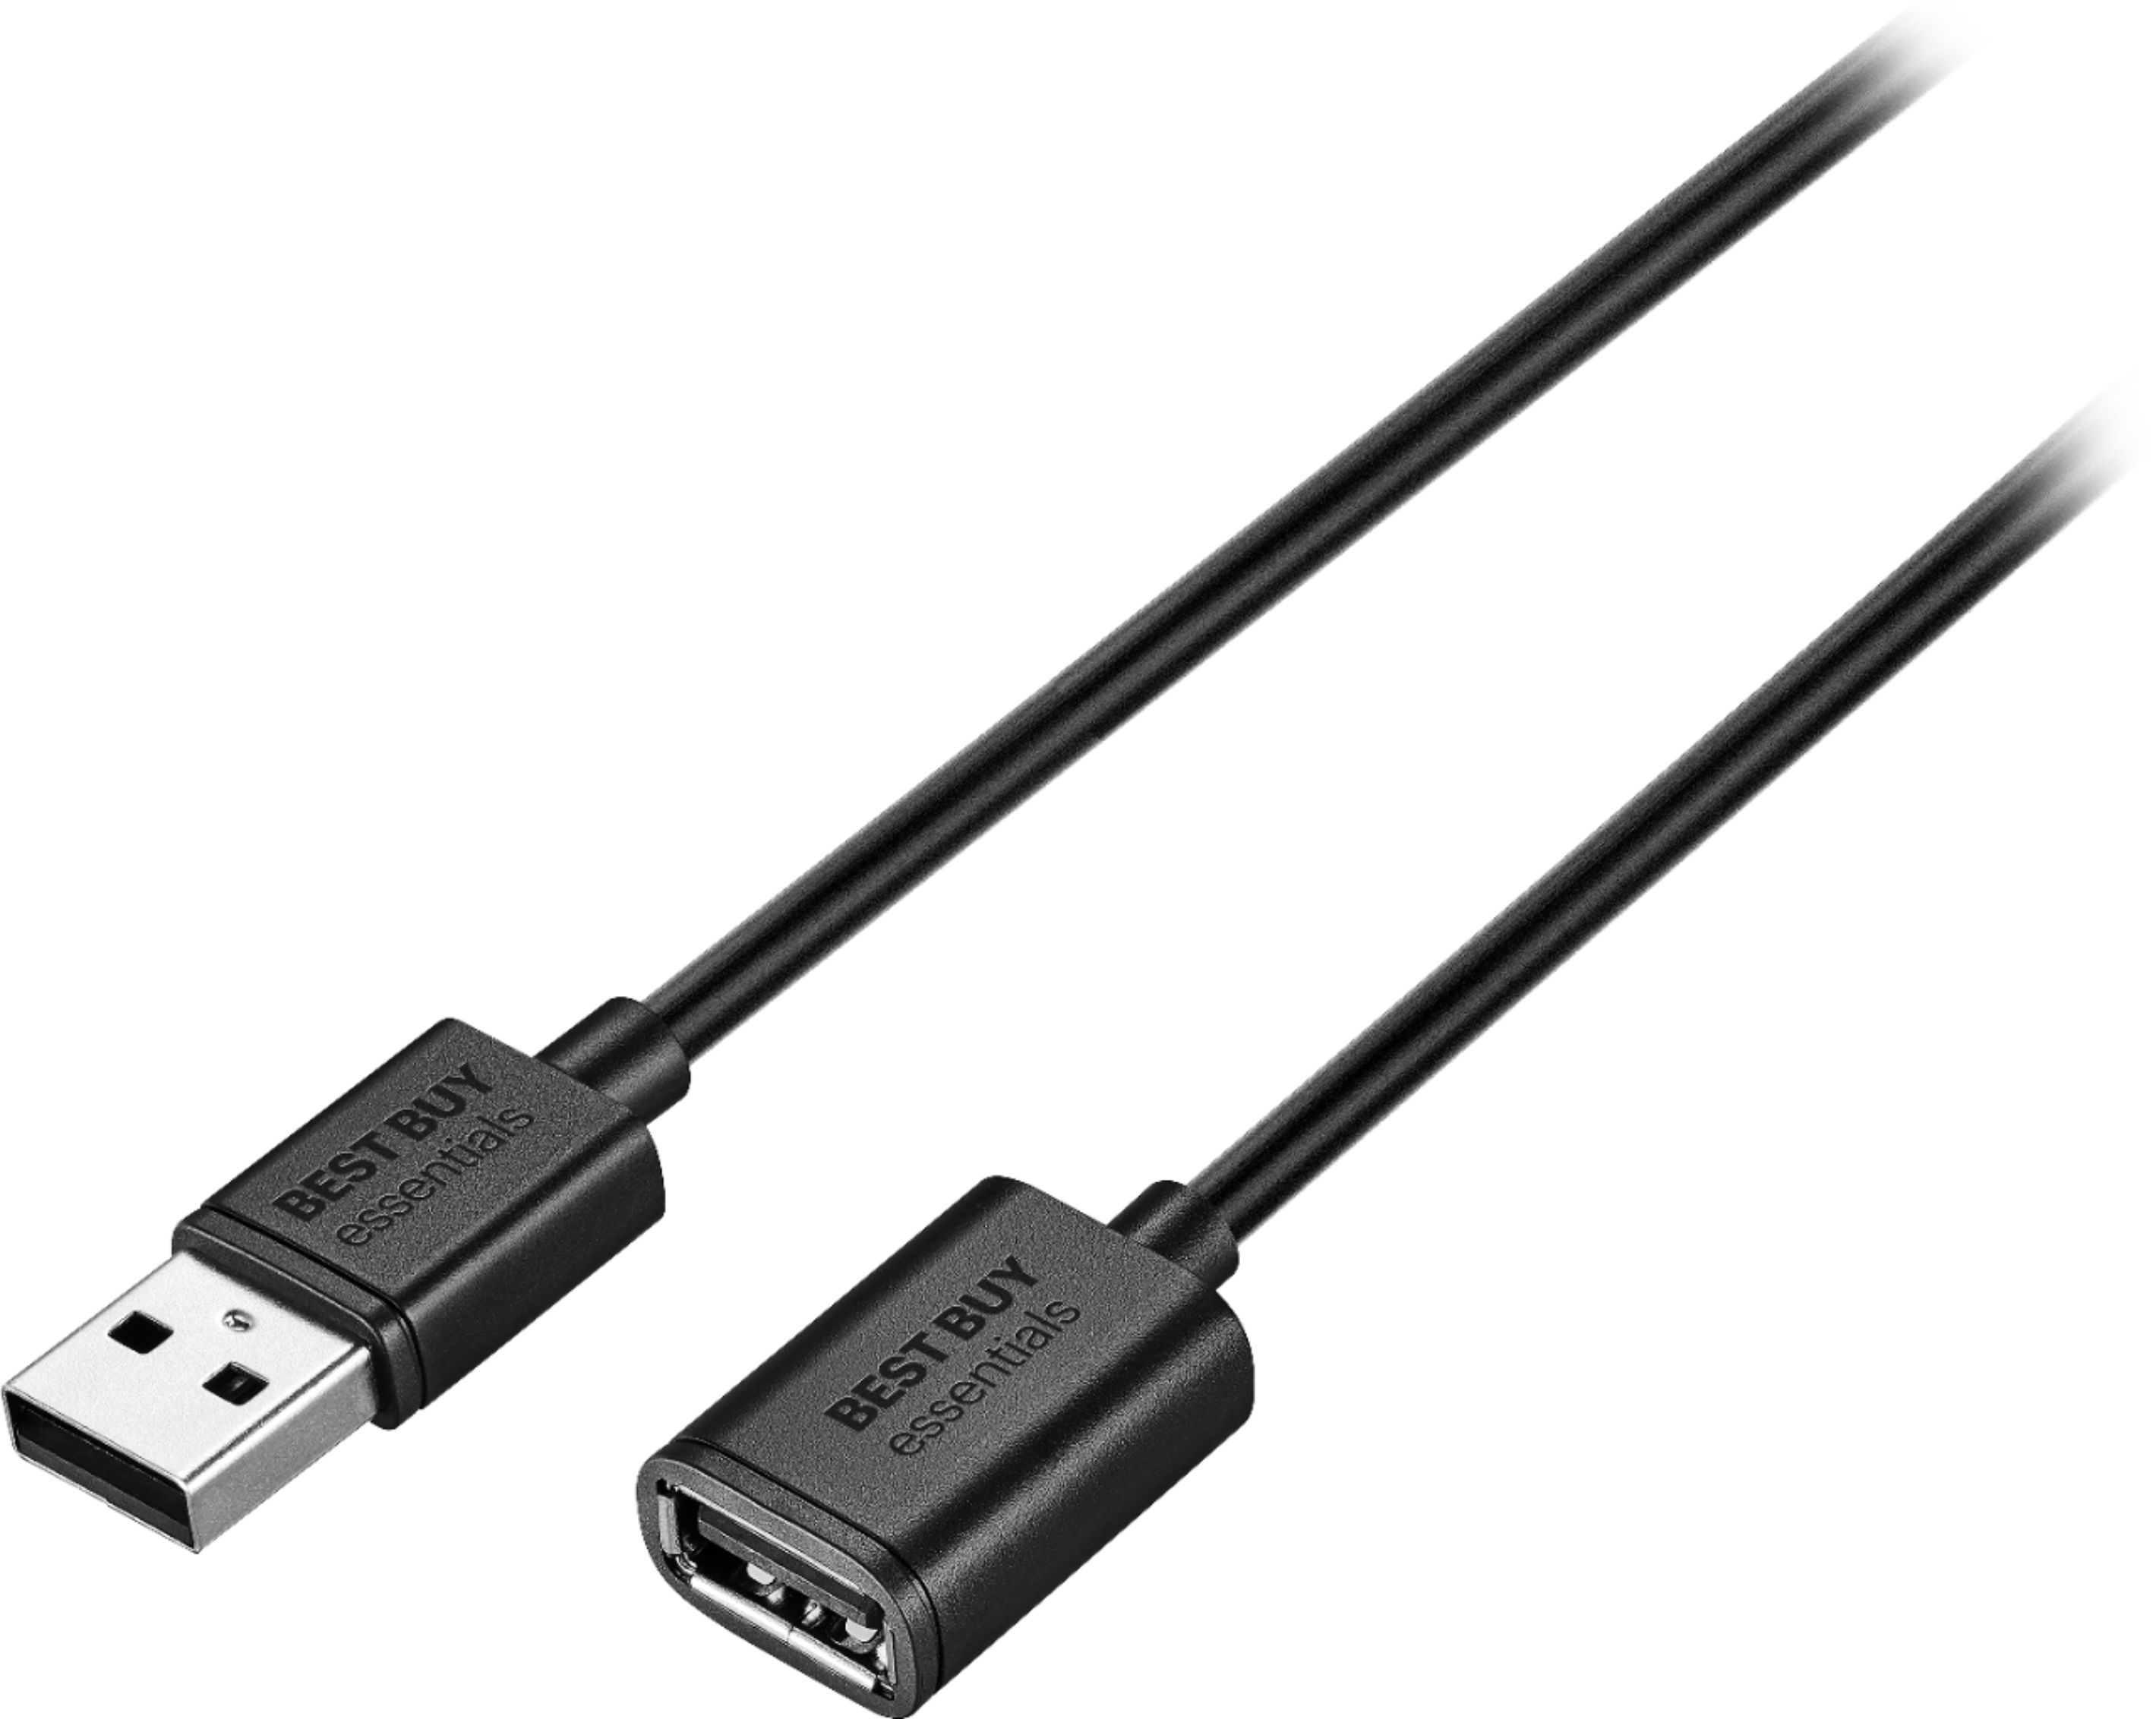 Hindre støn Skadelig Best Buy essentials™ 12' USB 2.0 A-Male to A-Female Extension Cable Black  BE-PC2A2A12 - Best Buy